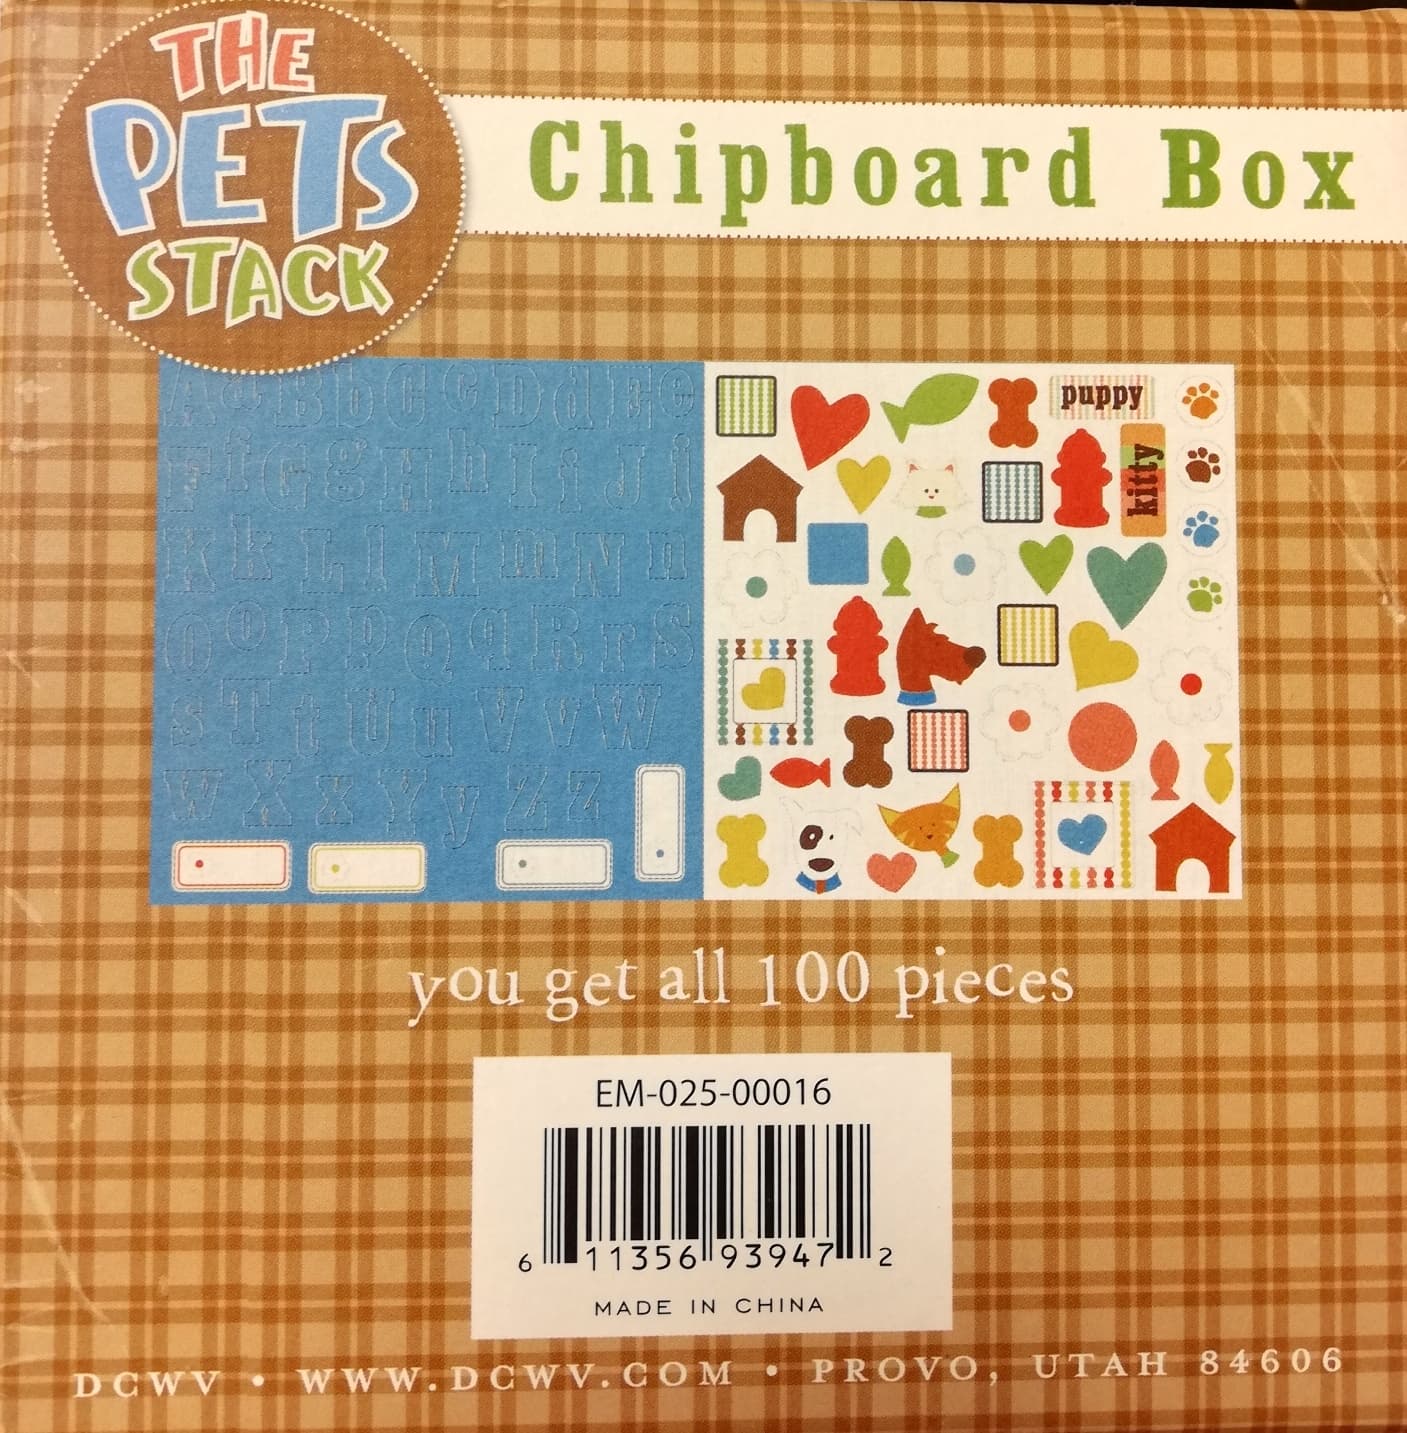 DCWV: The Pet Stack chipboard box